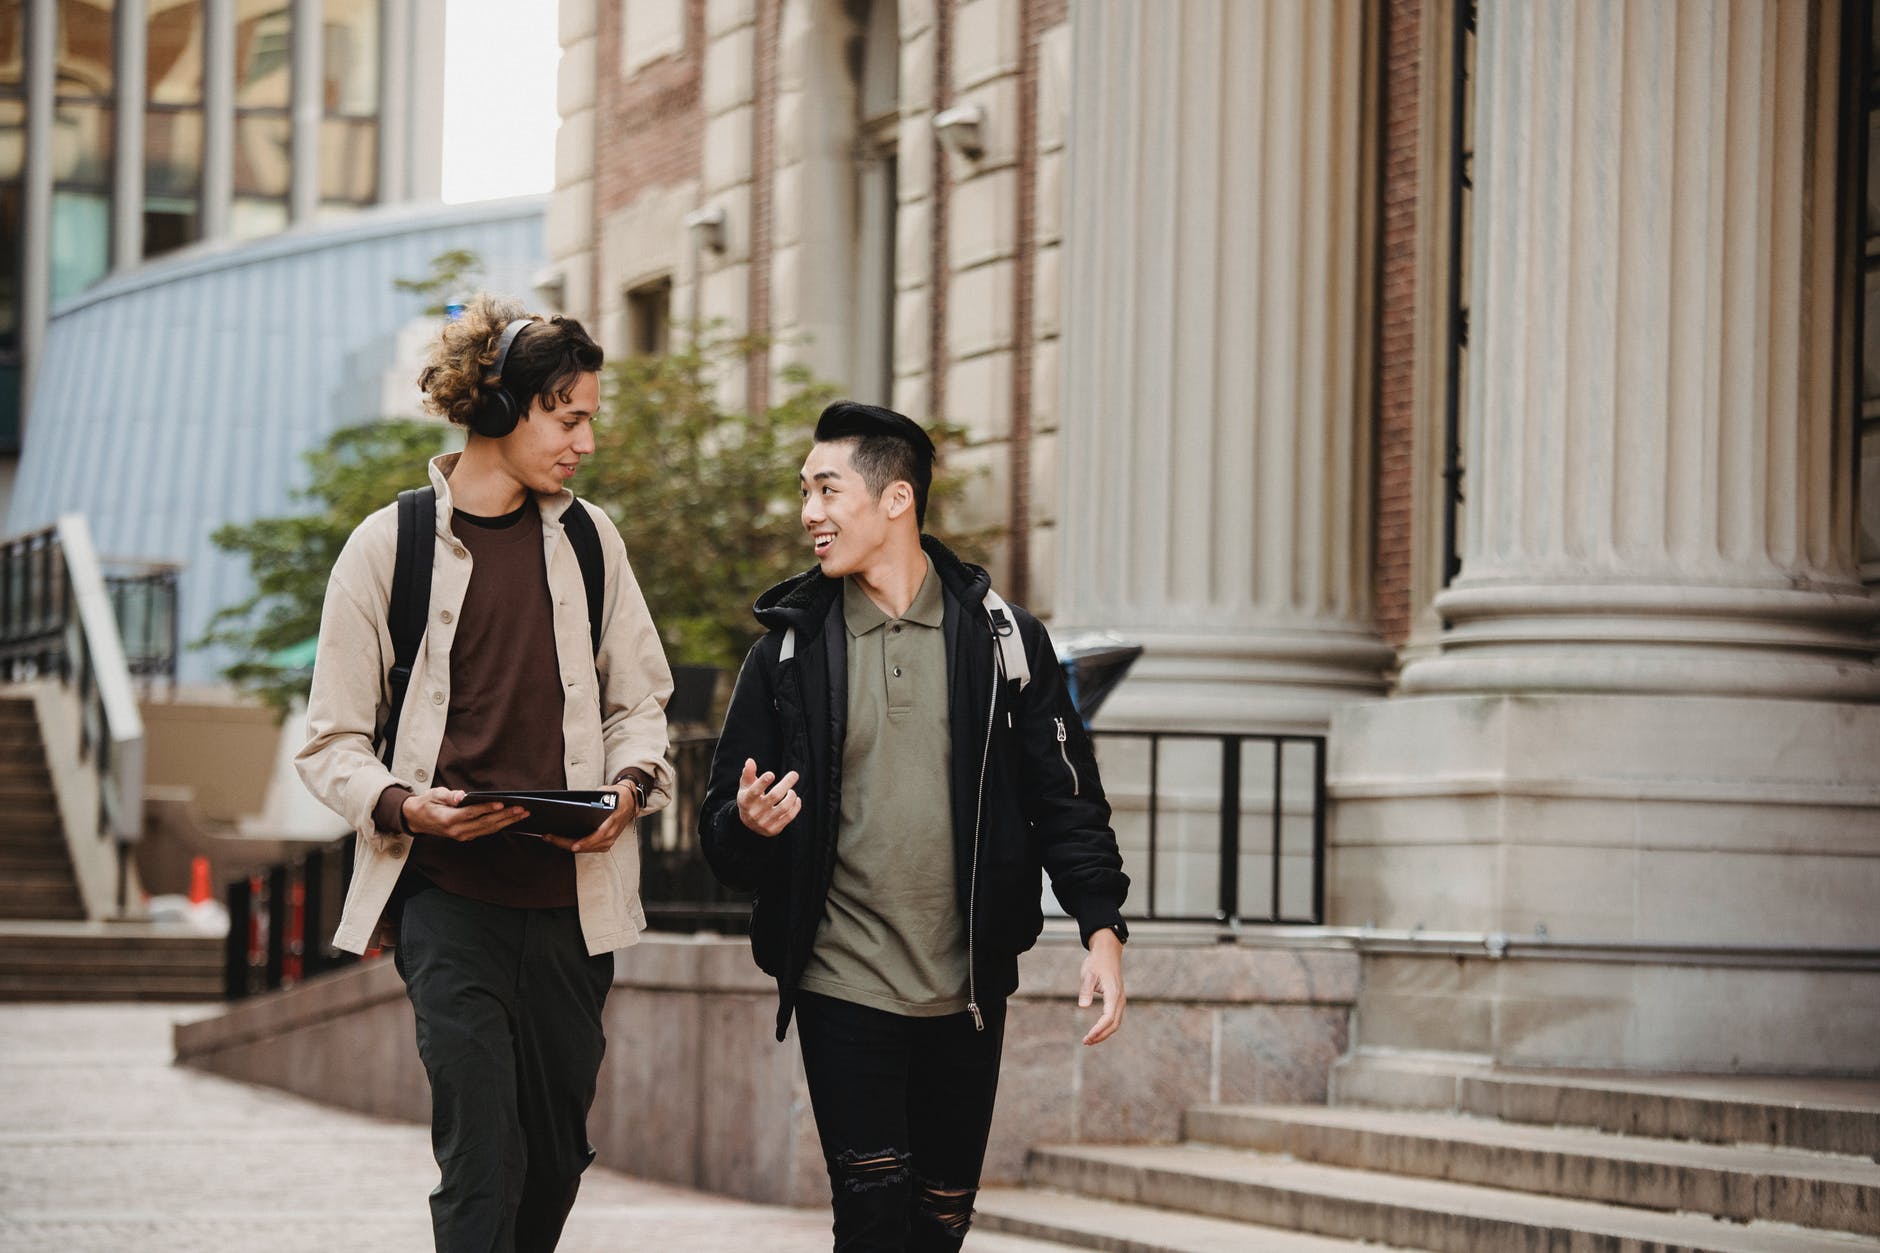 Two students talking and walking around campus | Source: Pexels